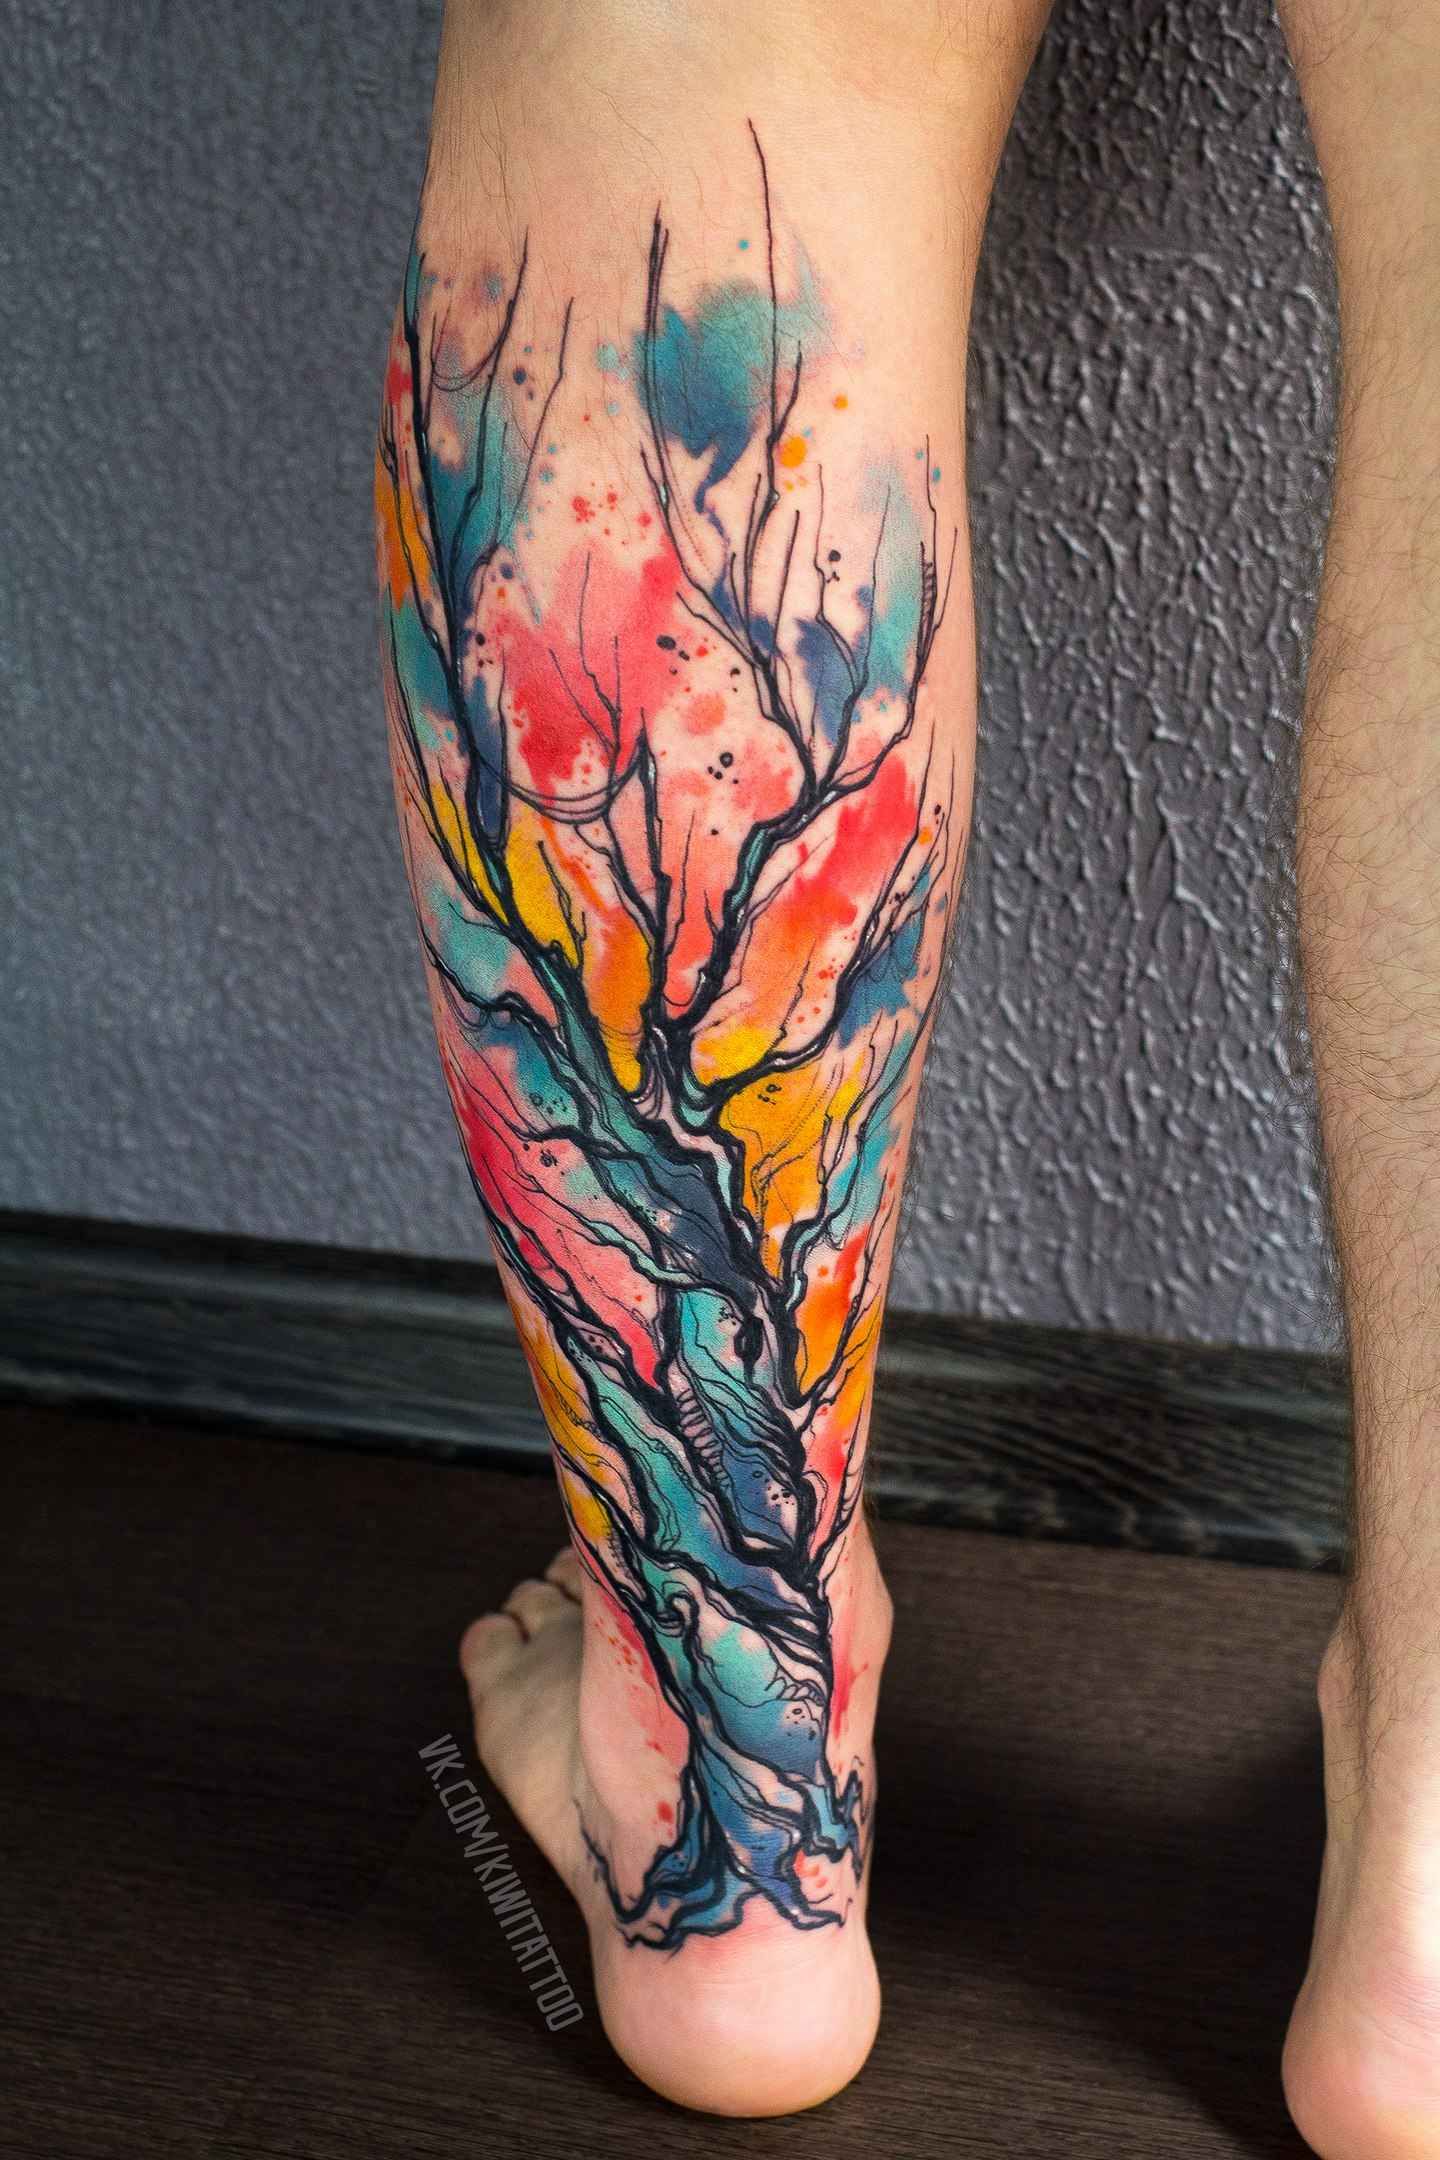 Watercolor Style Tattoos